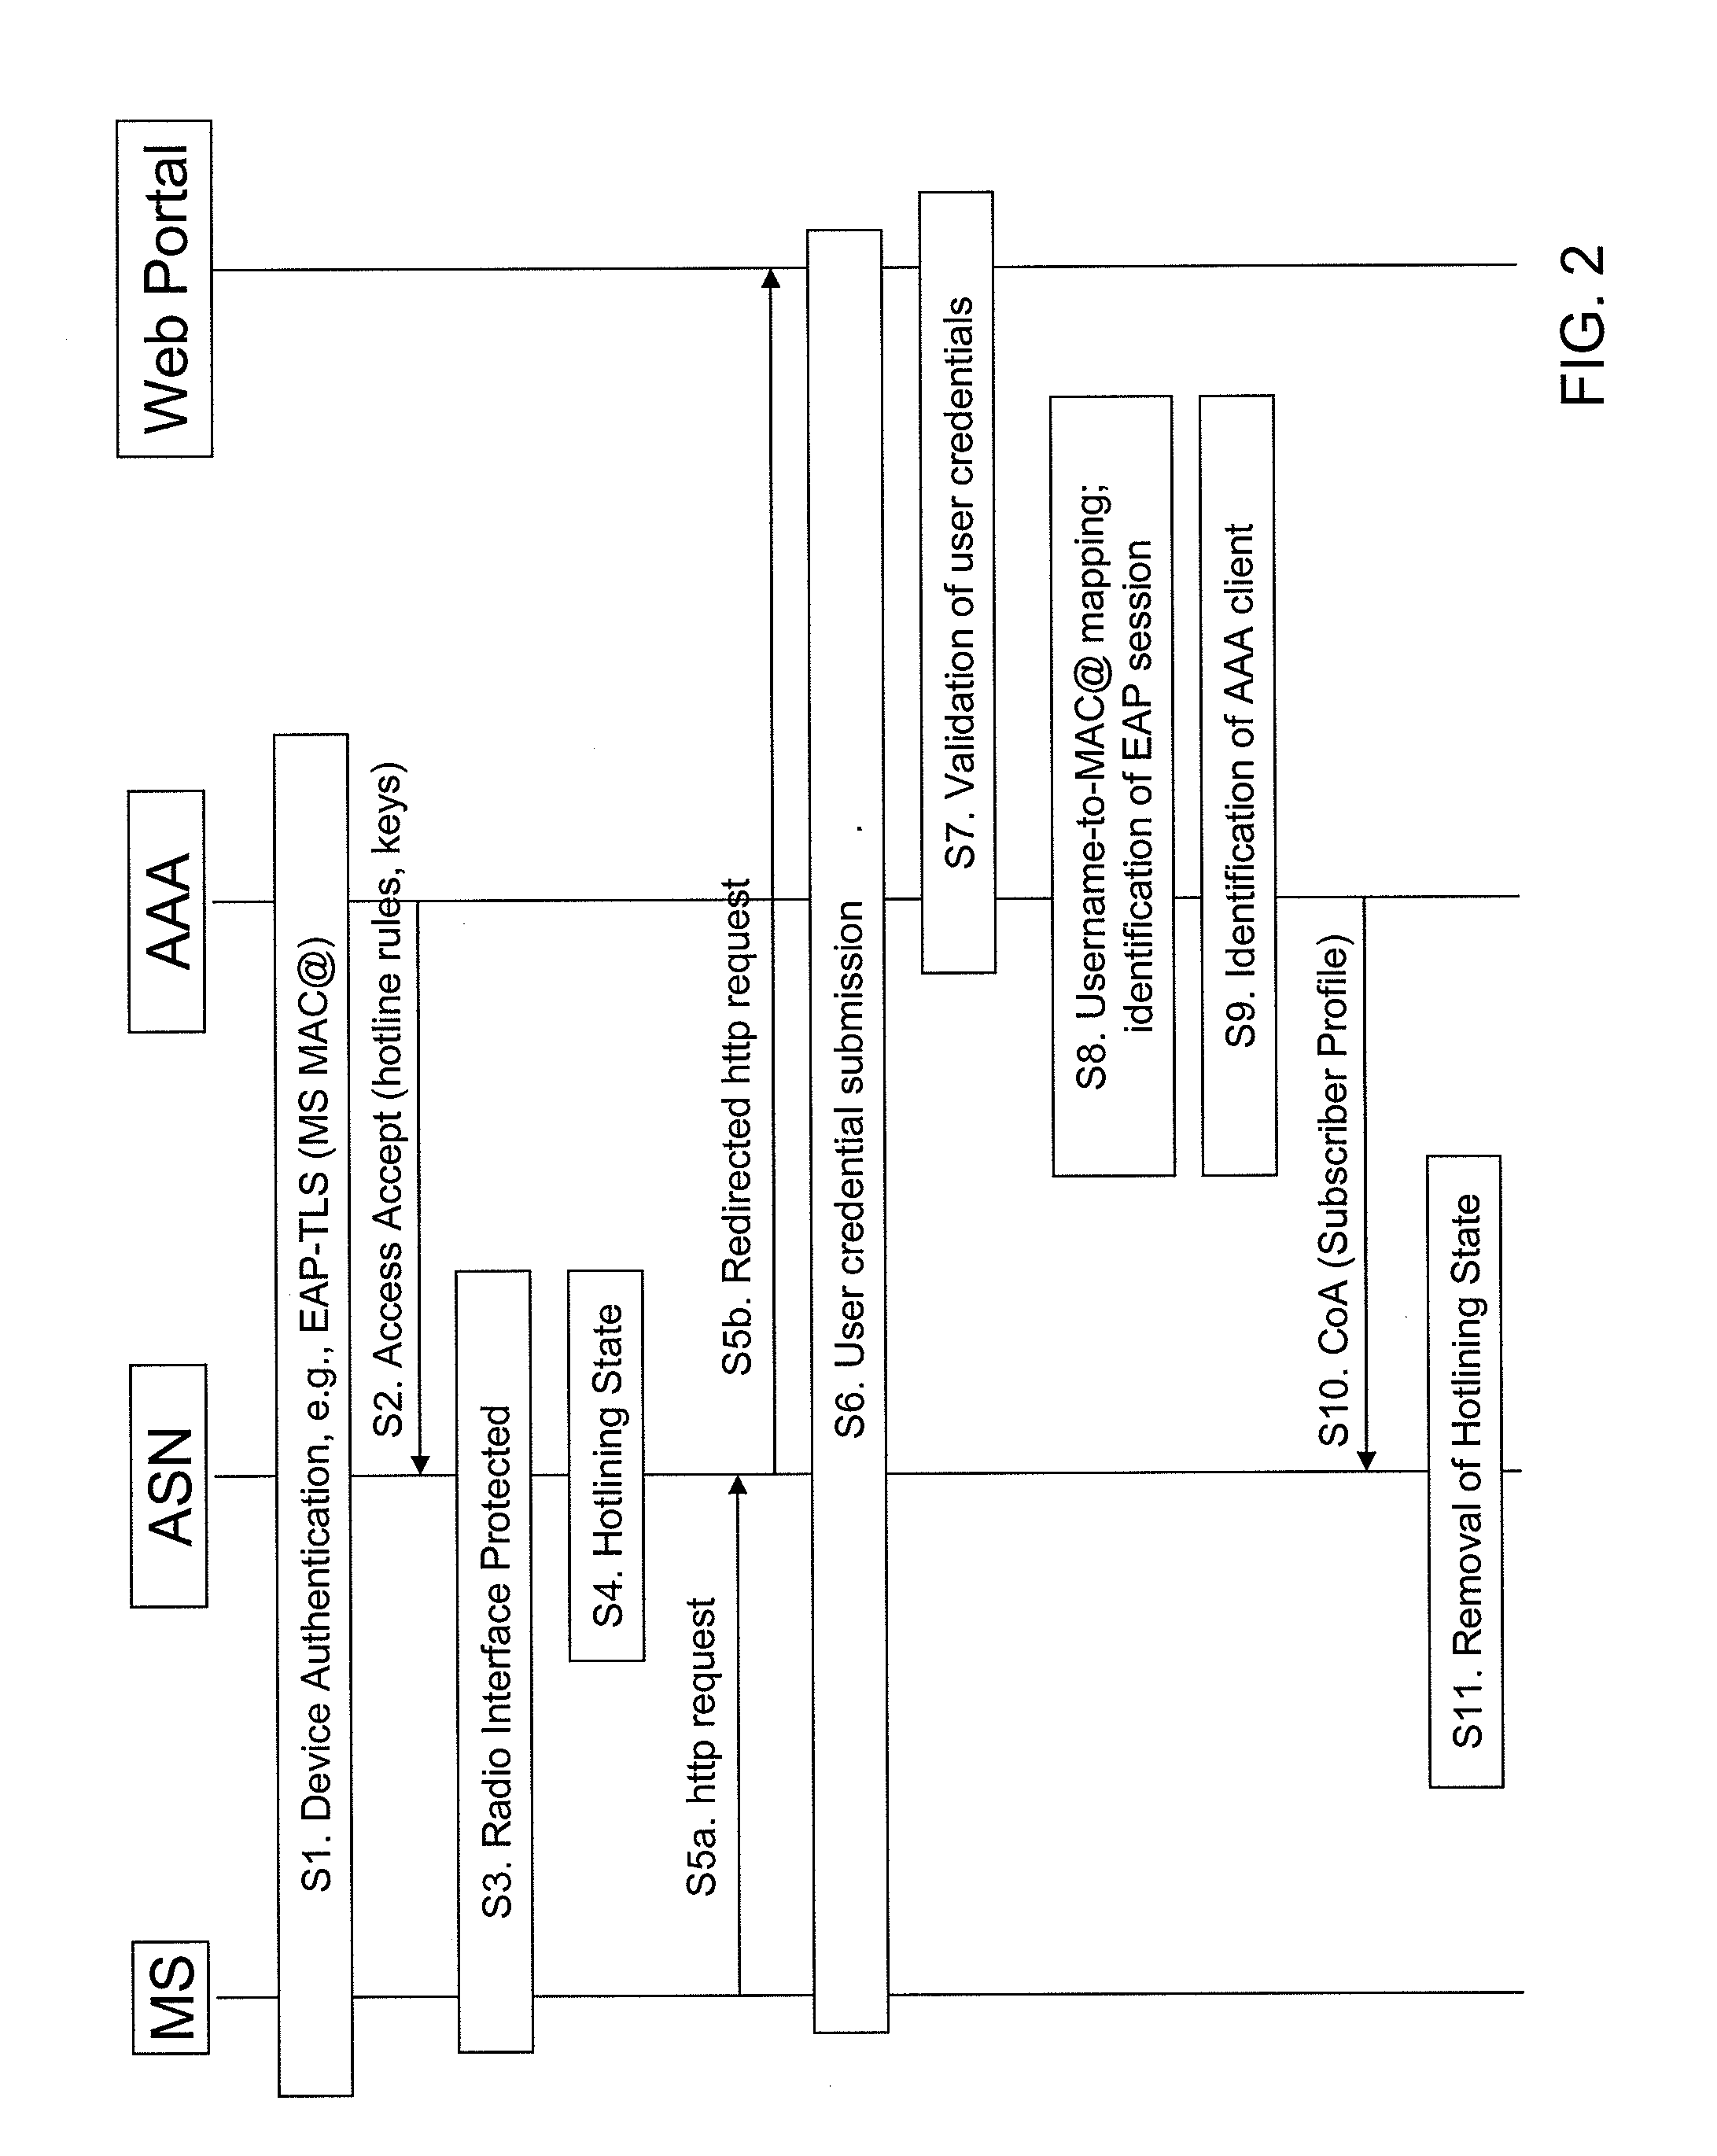 Mechanism for authentication and authorization for network and service access